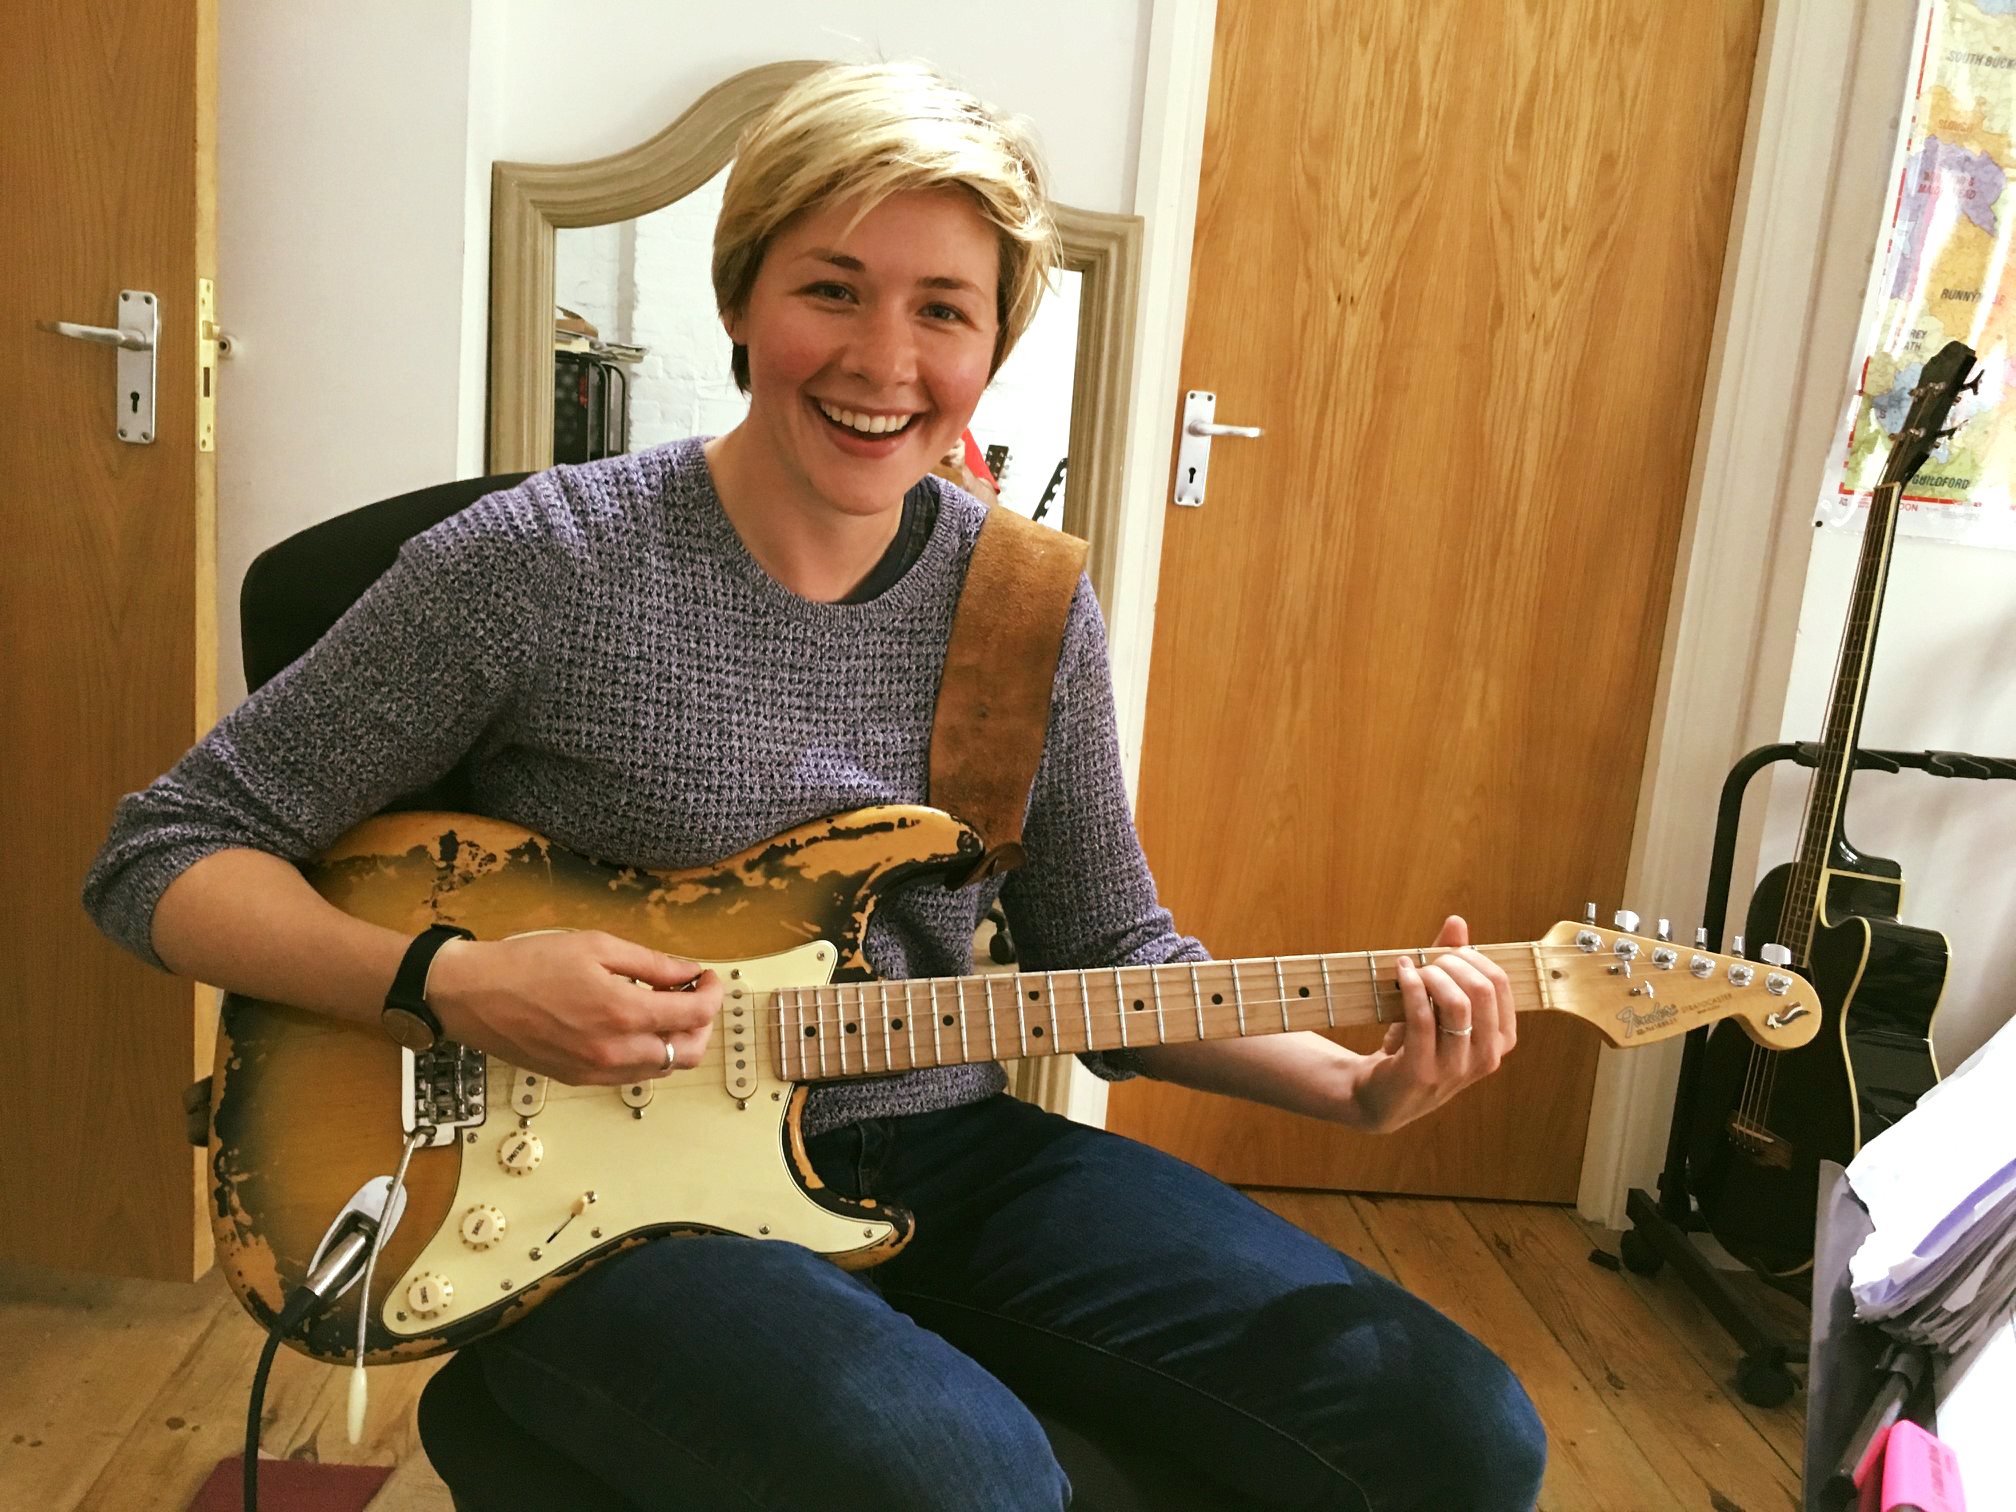 The benefits of taking guitar lessons with a inspiring tutor